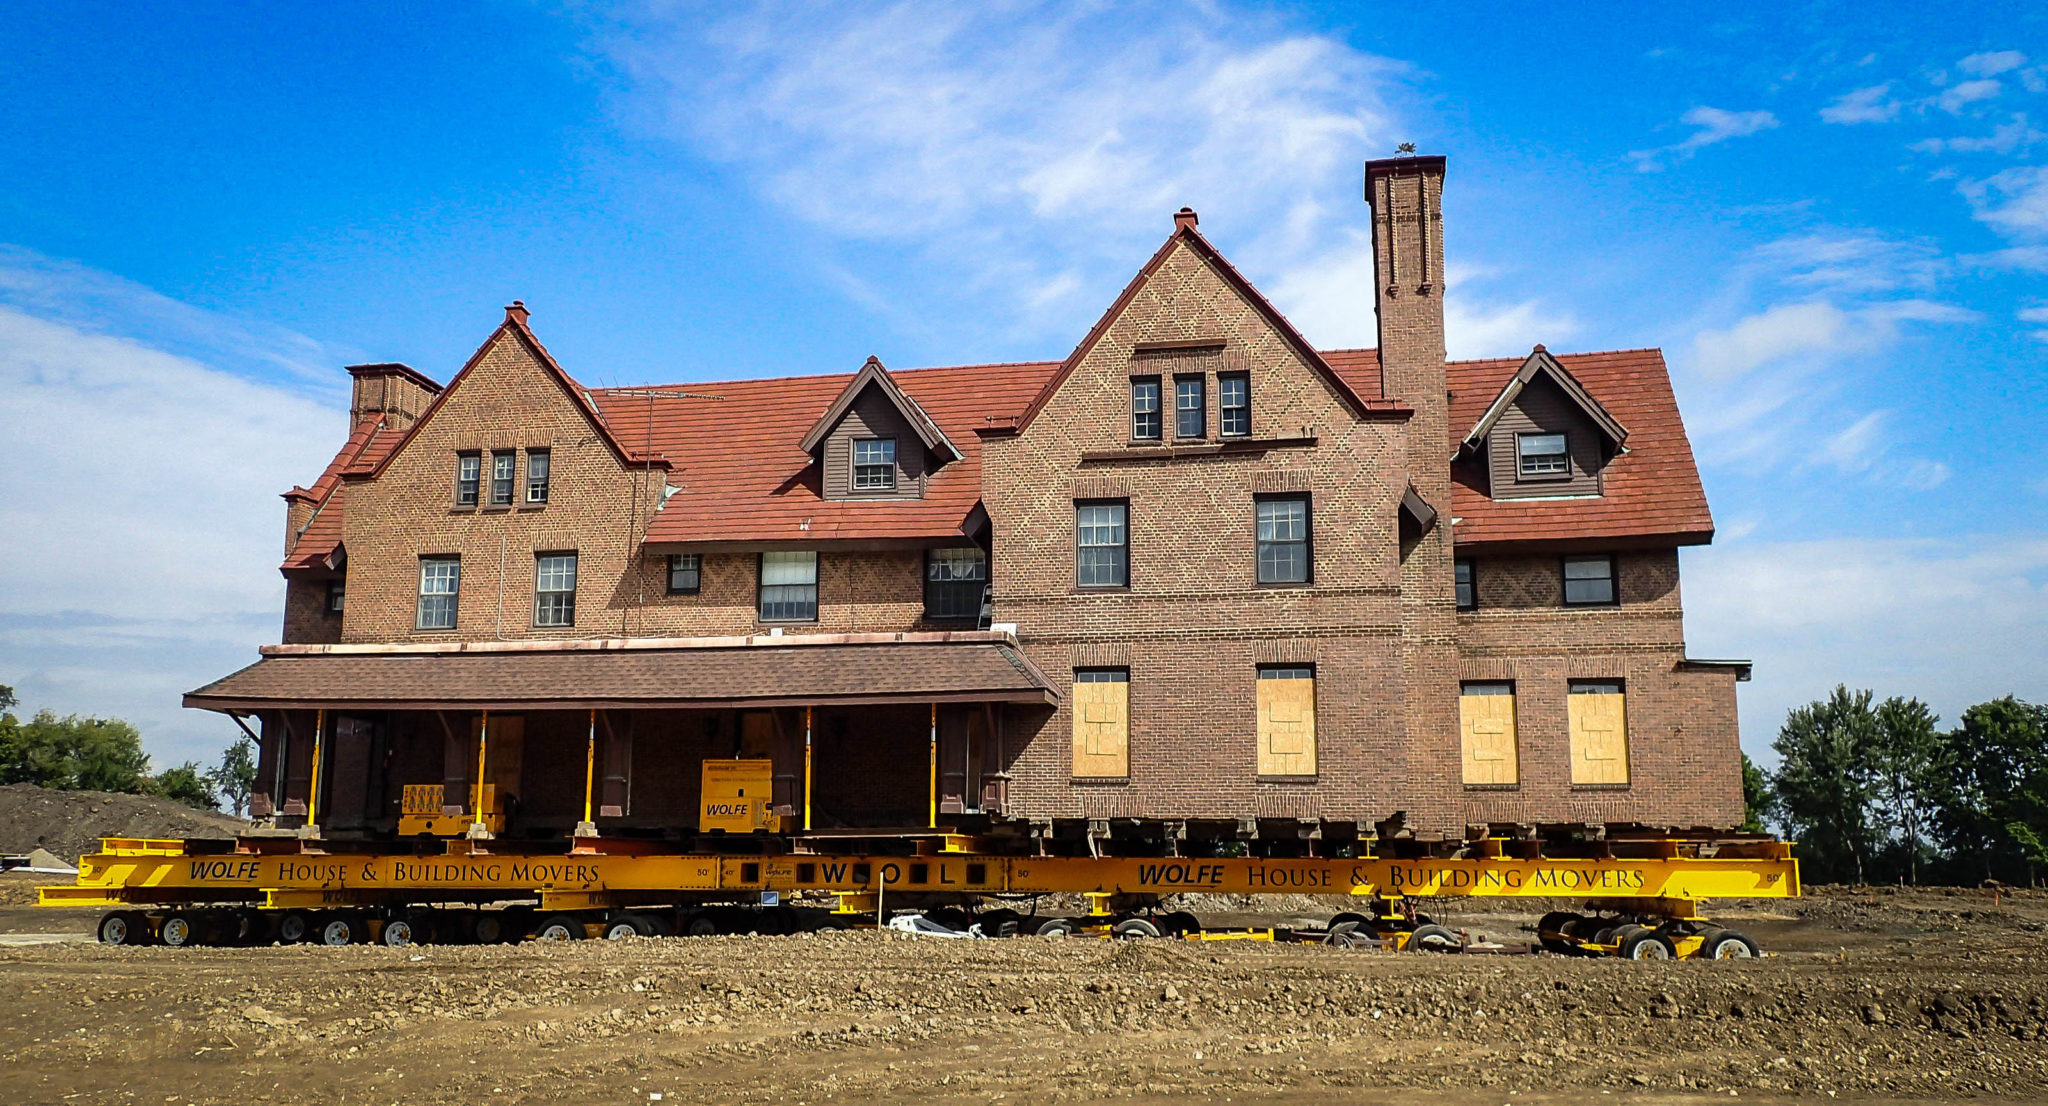 Seven Gables Mansion moving on dolly.